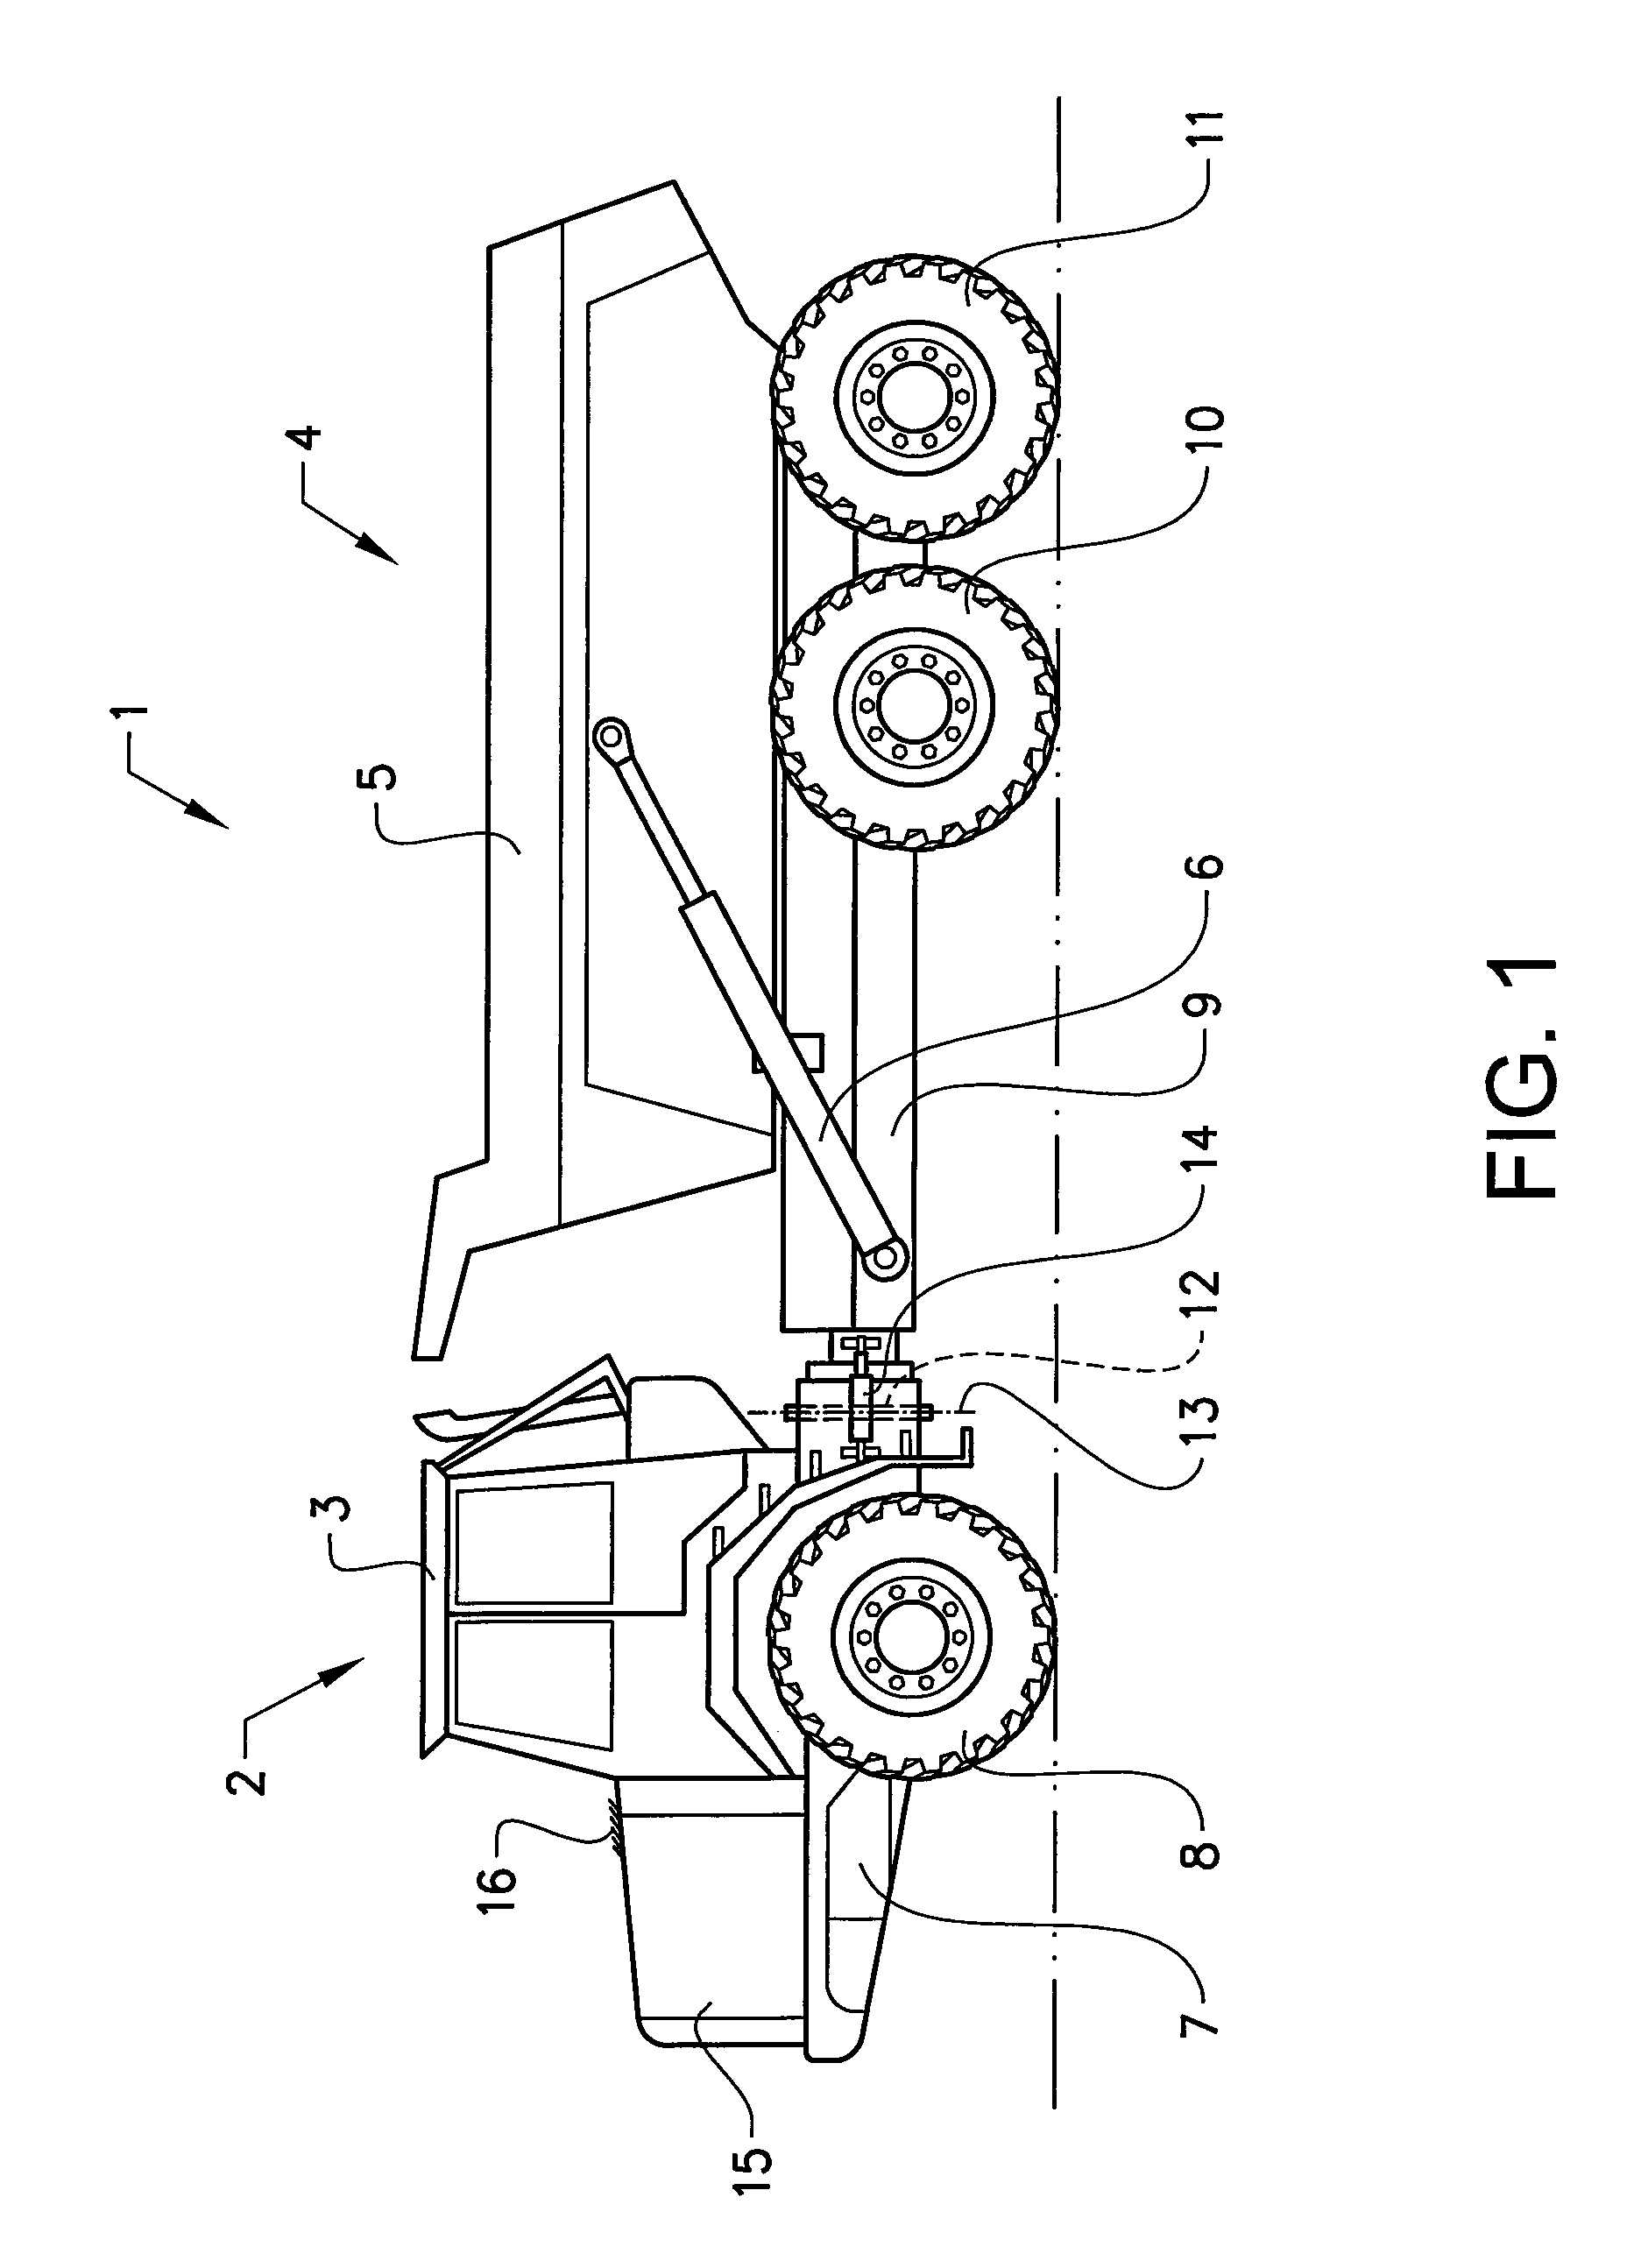 Arrangement and a method for controlling the temperature of air being fed to a vehicle engine